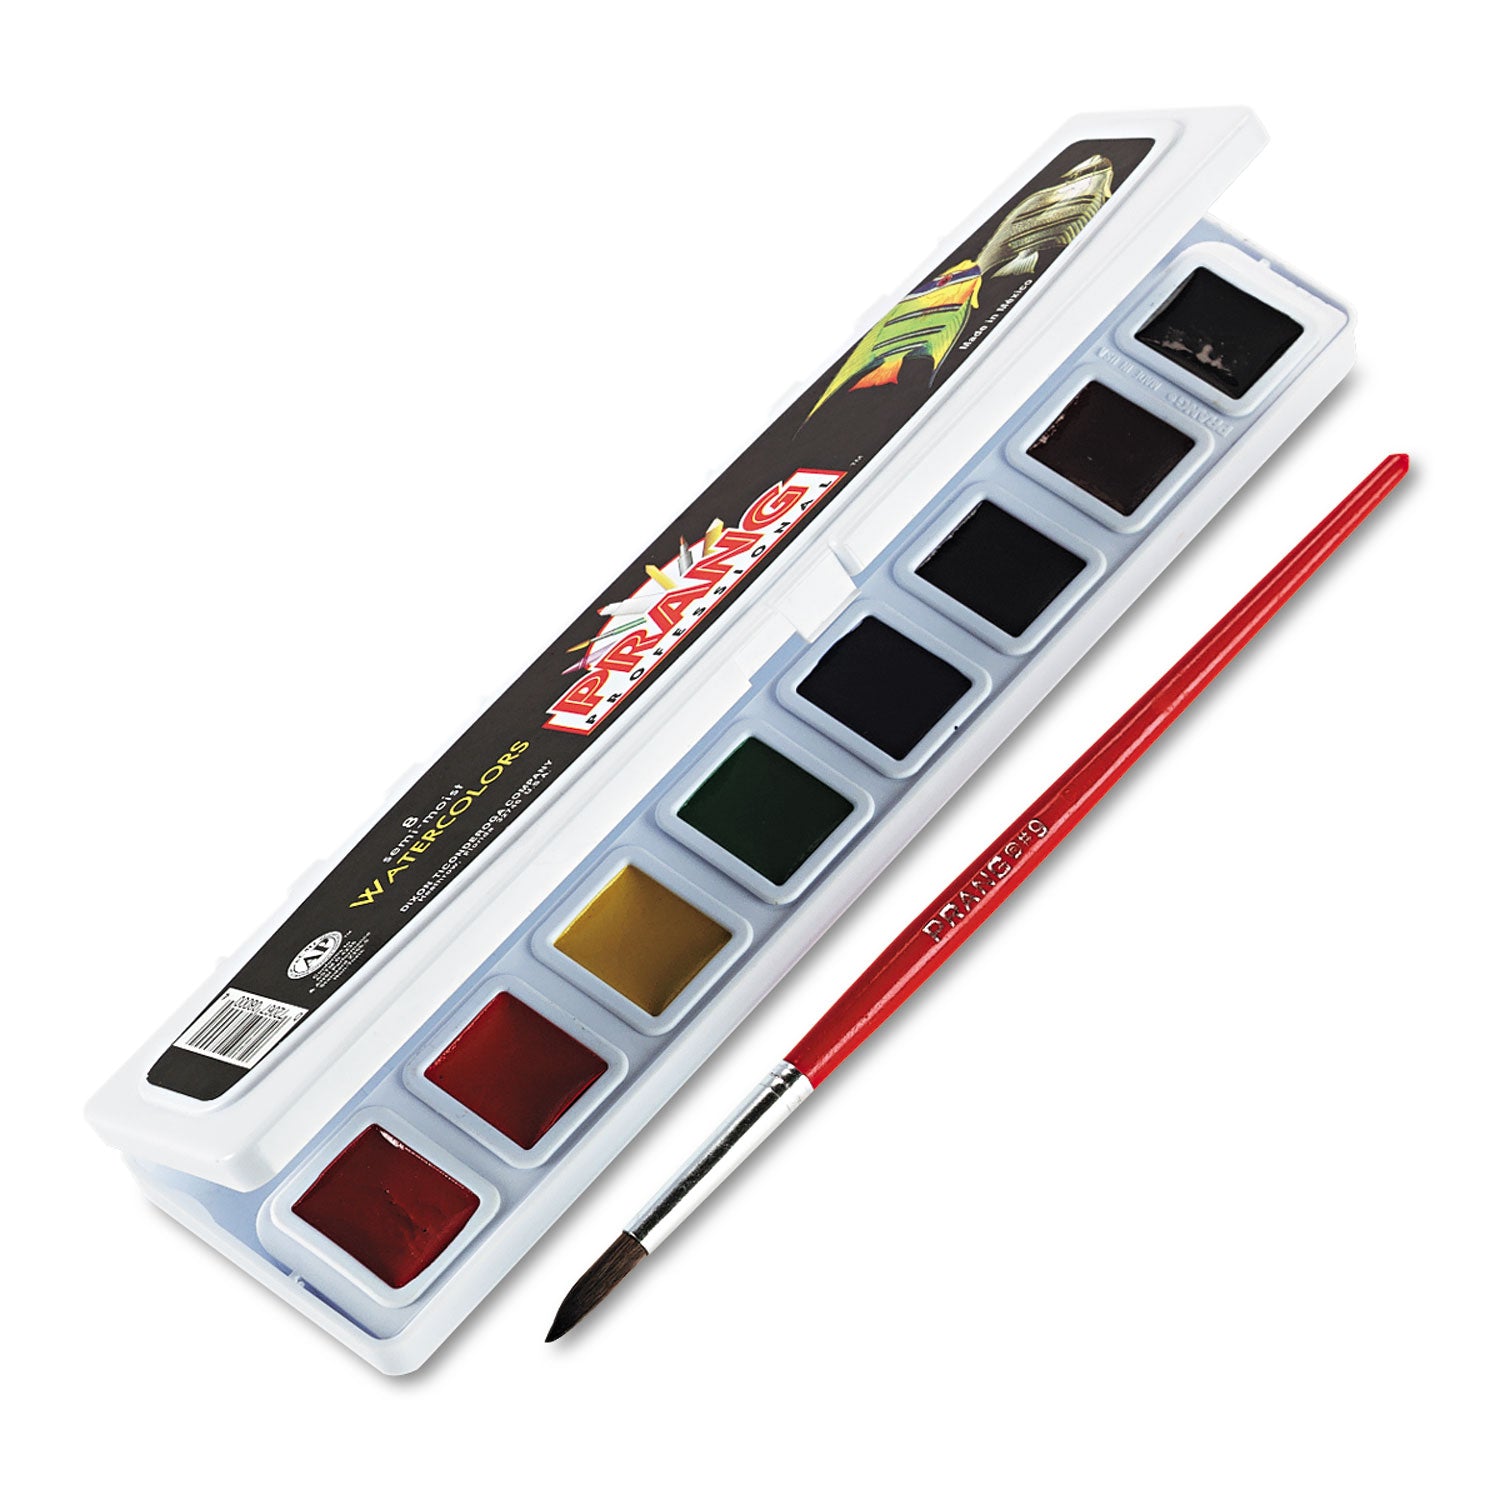 Professional Watercolors, 8 Assorted Colors, Rectangular Pan Palette Tray - 